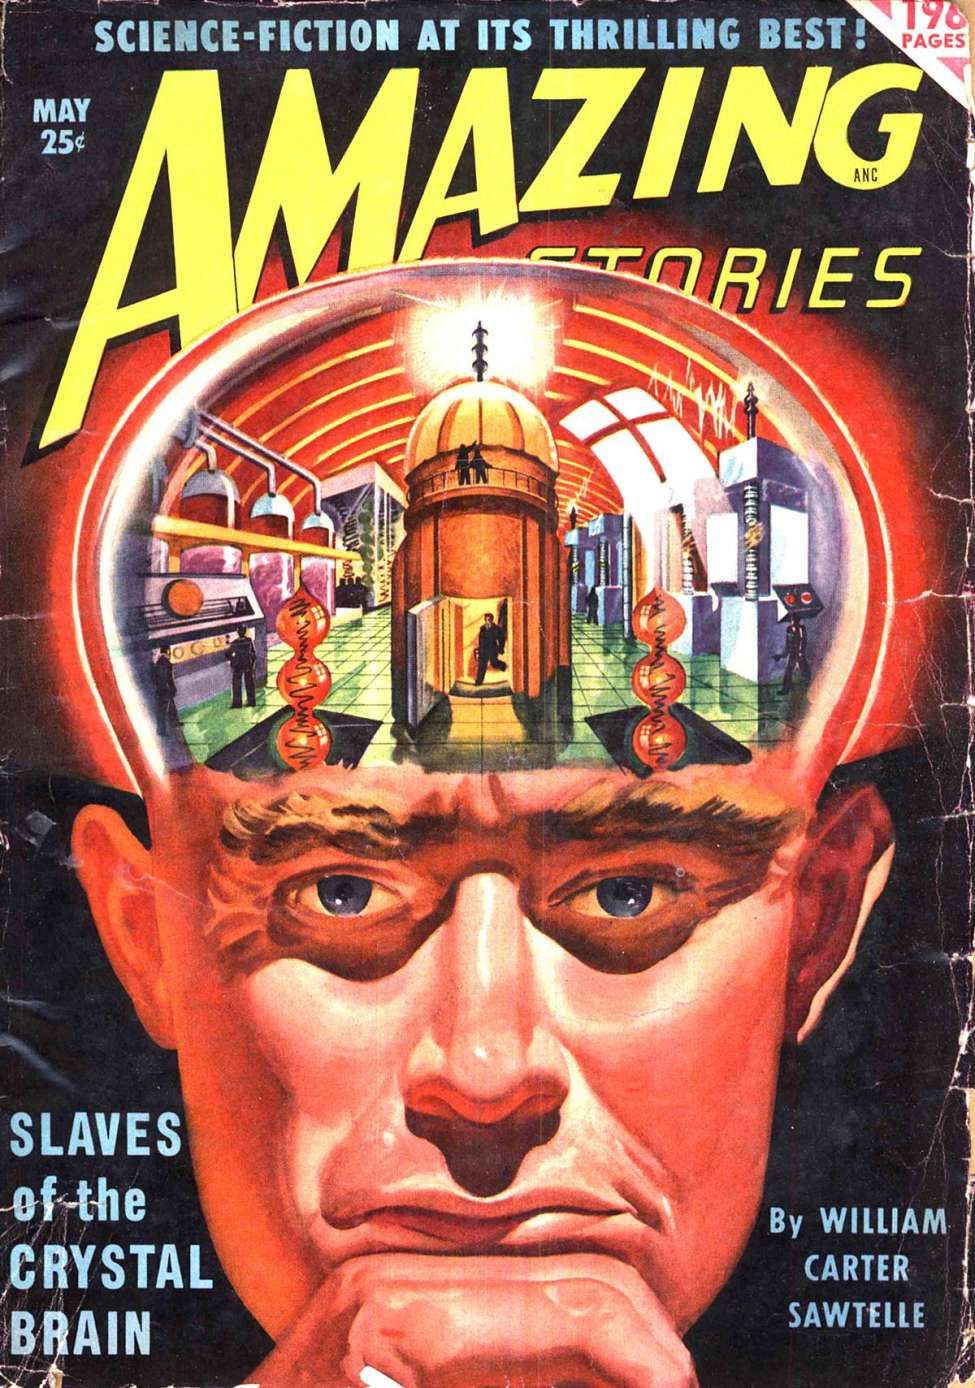 Book Cover For Amazing Stories v24 5 - Slaves of the Crystal Brain - William Carter Sawtelle